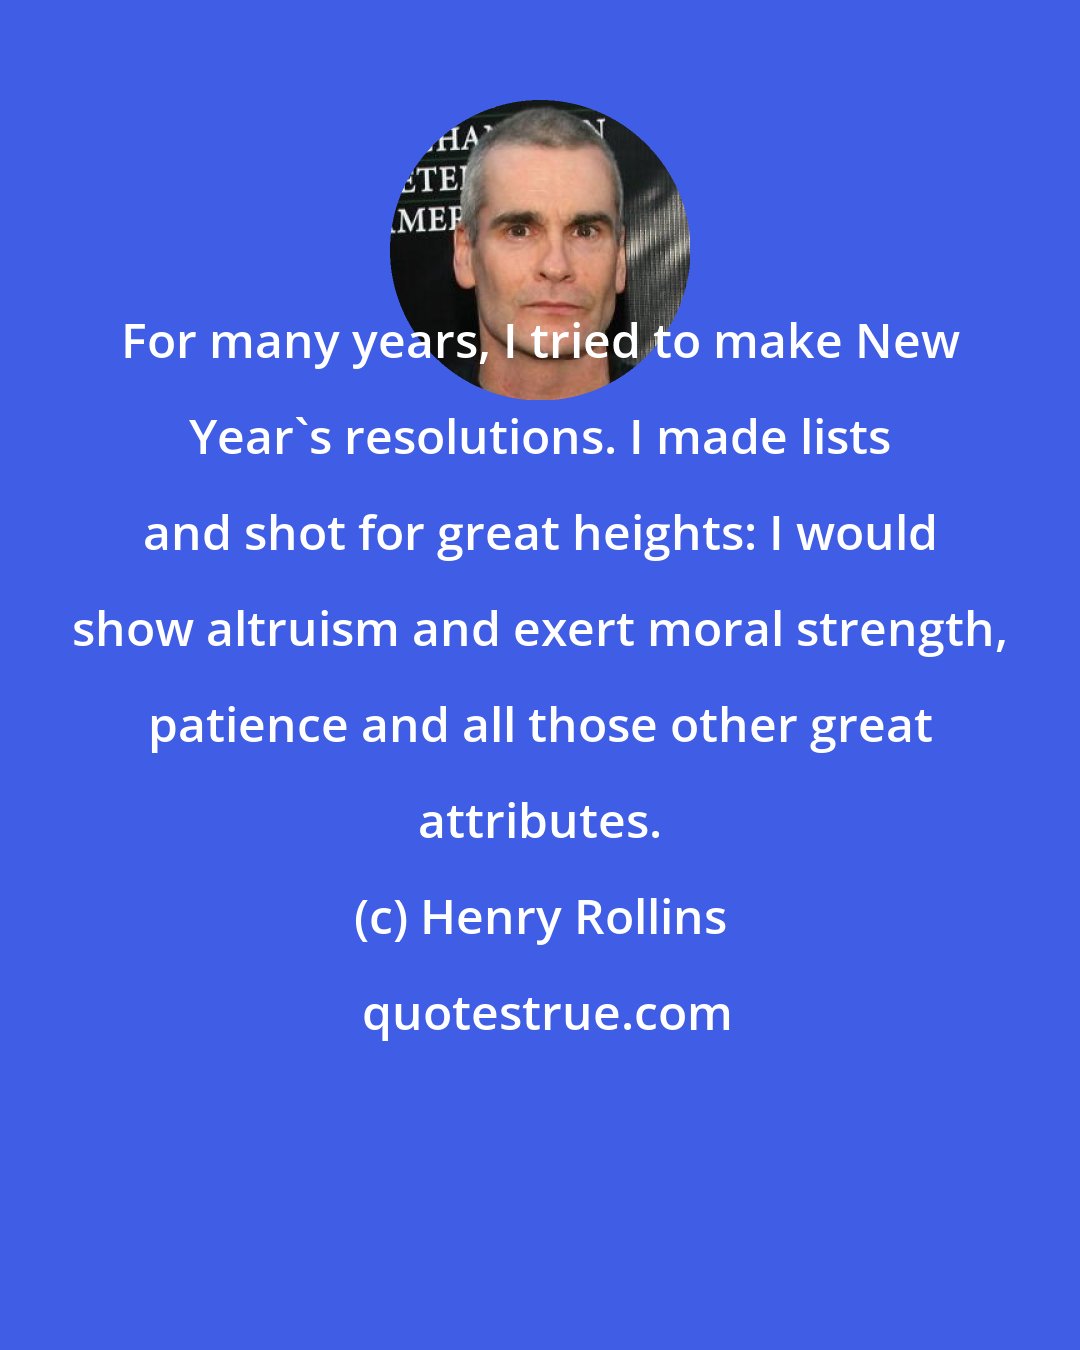 Henry Rollins: For many years, I tried to make New Year's resolutions. I made lists and shot for great heights: I would show altruism and exert moral strength, patience and all those other great attributes.